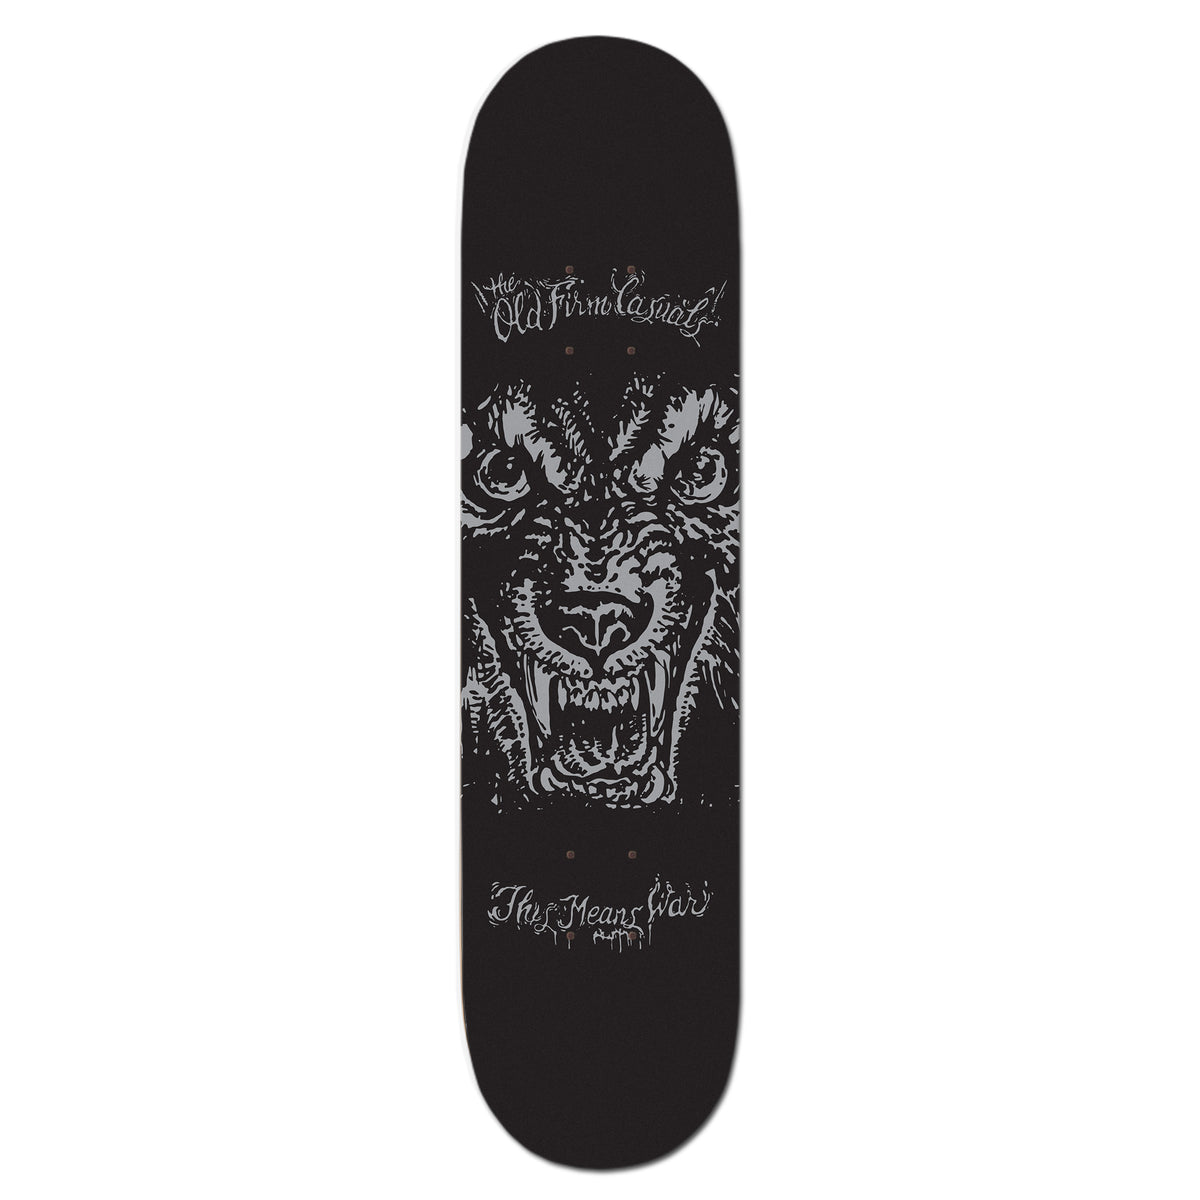 The Old Firm Casuals - Wolf - Skateboard Deck